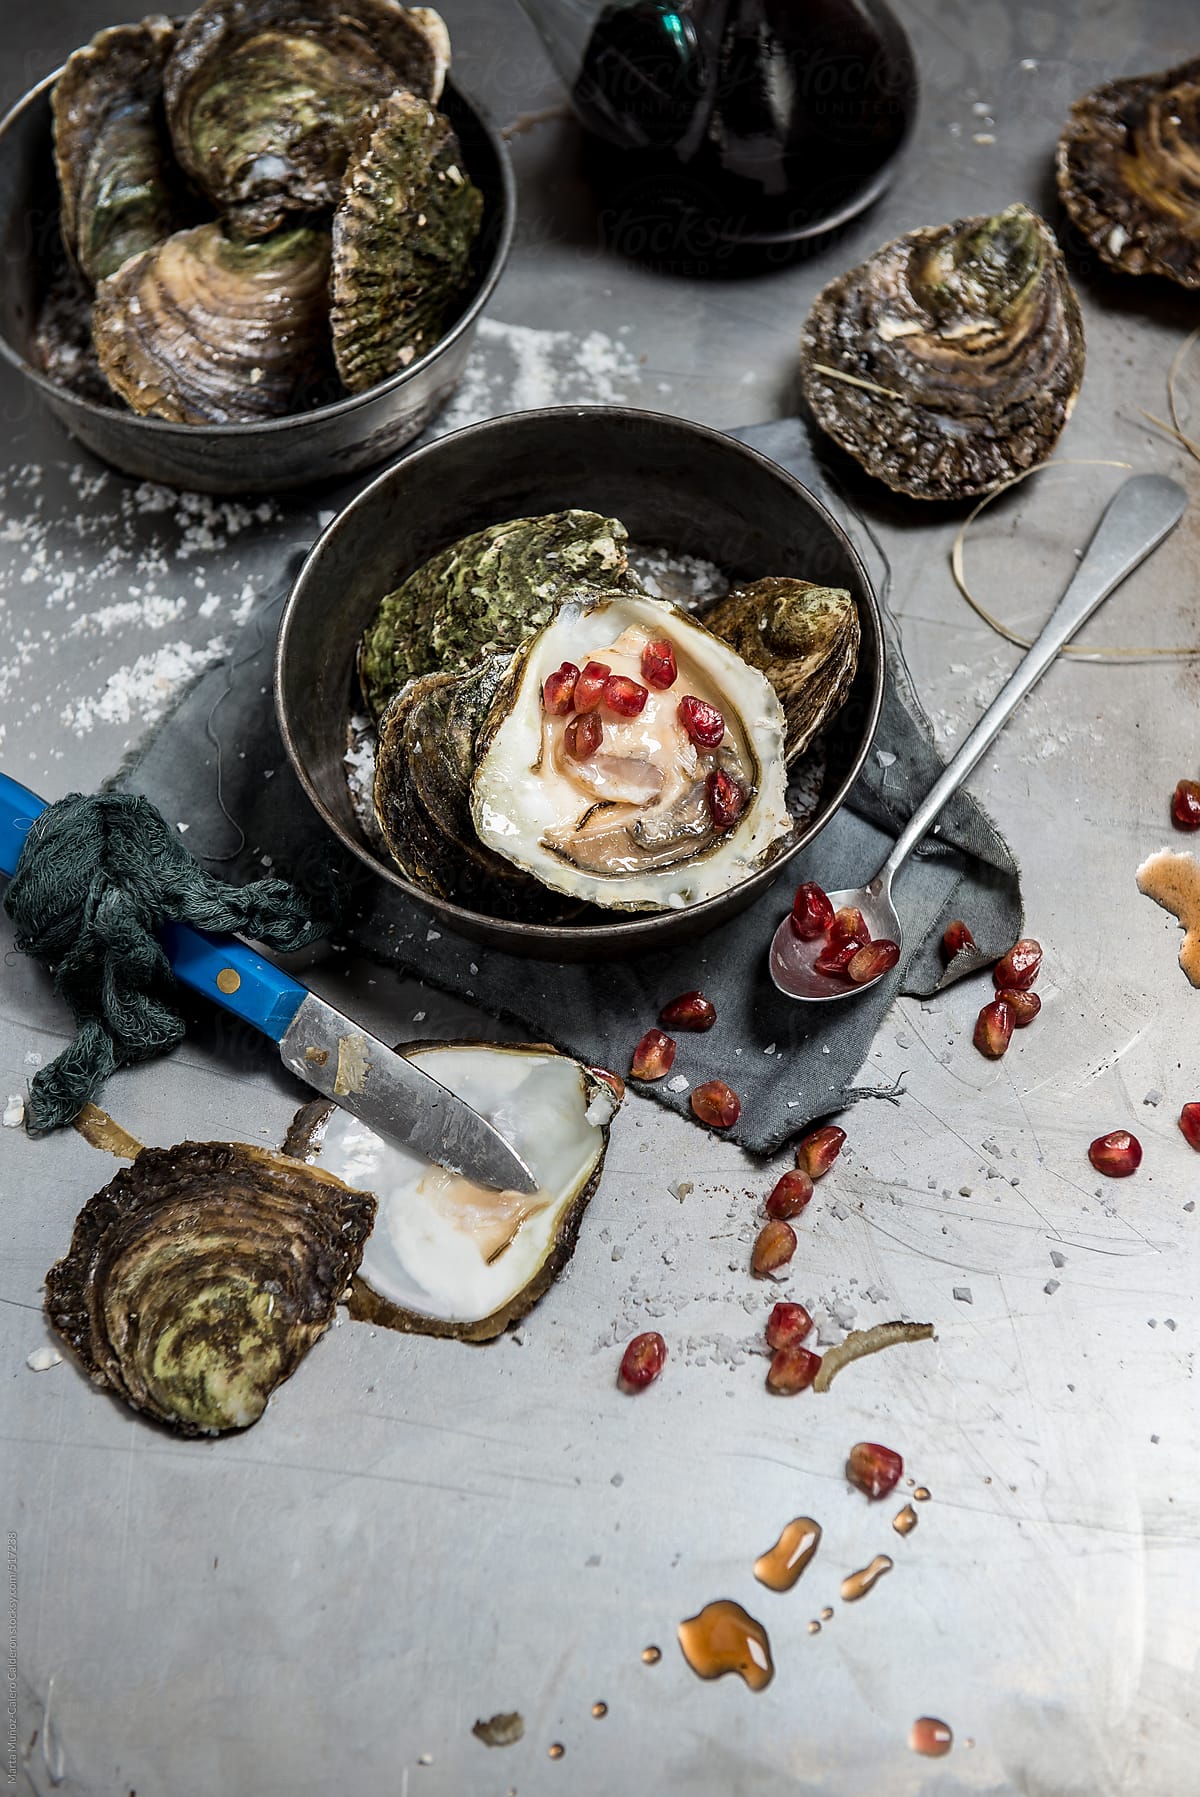 Oysters on metallic background with pomegranate and oyster knife opener